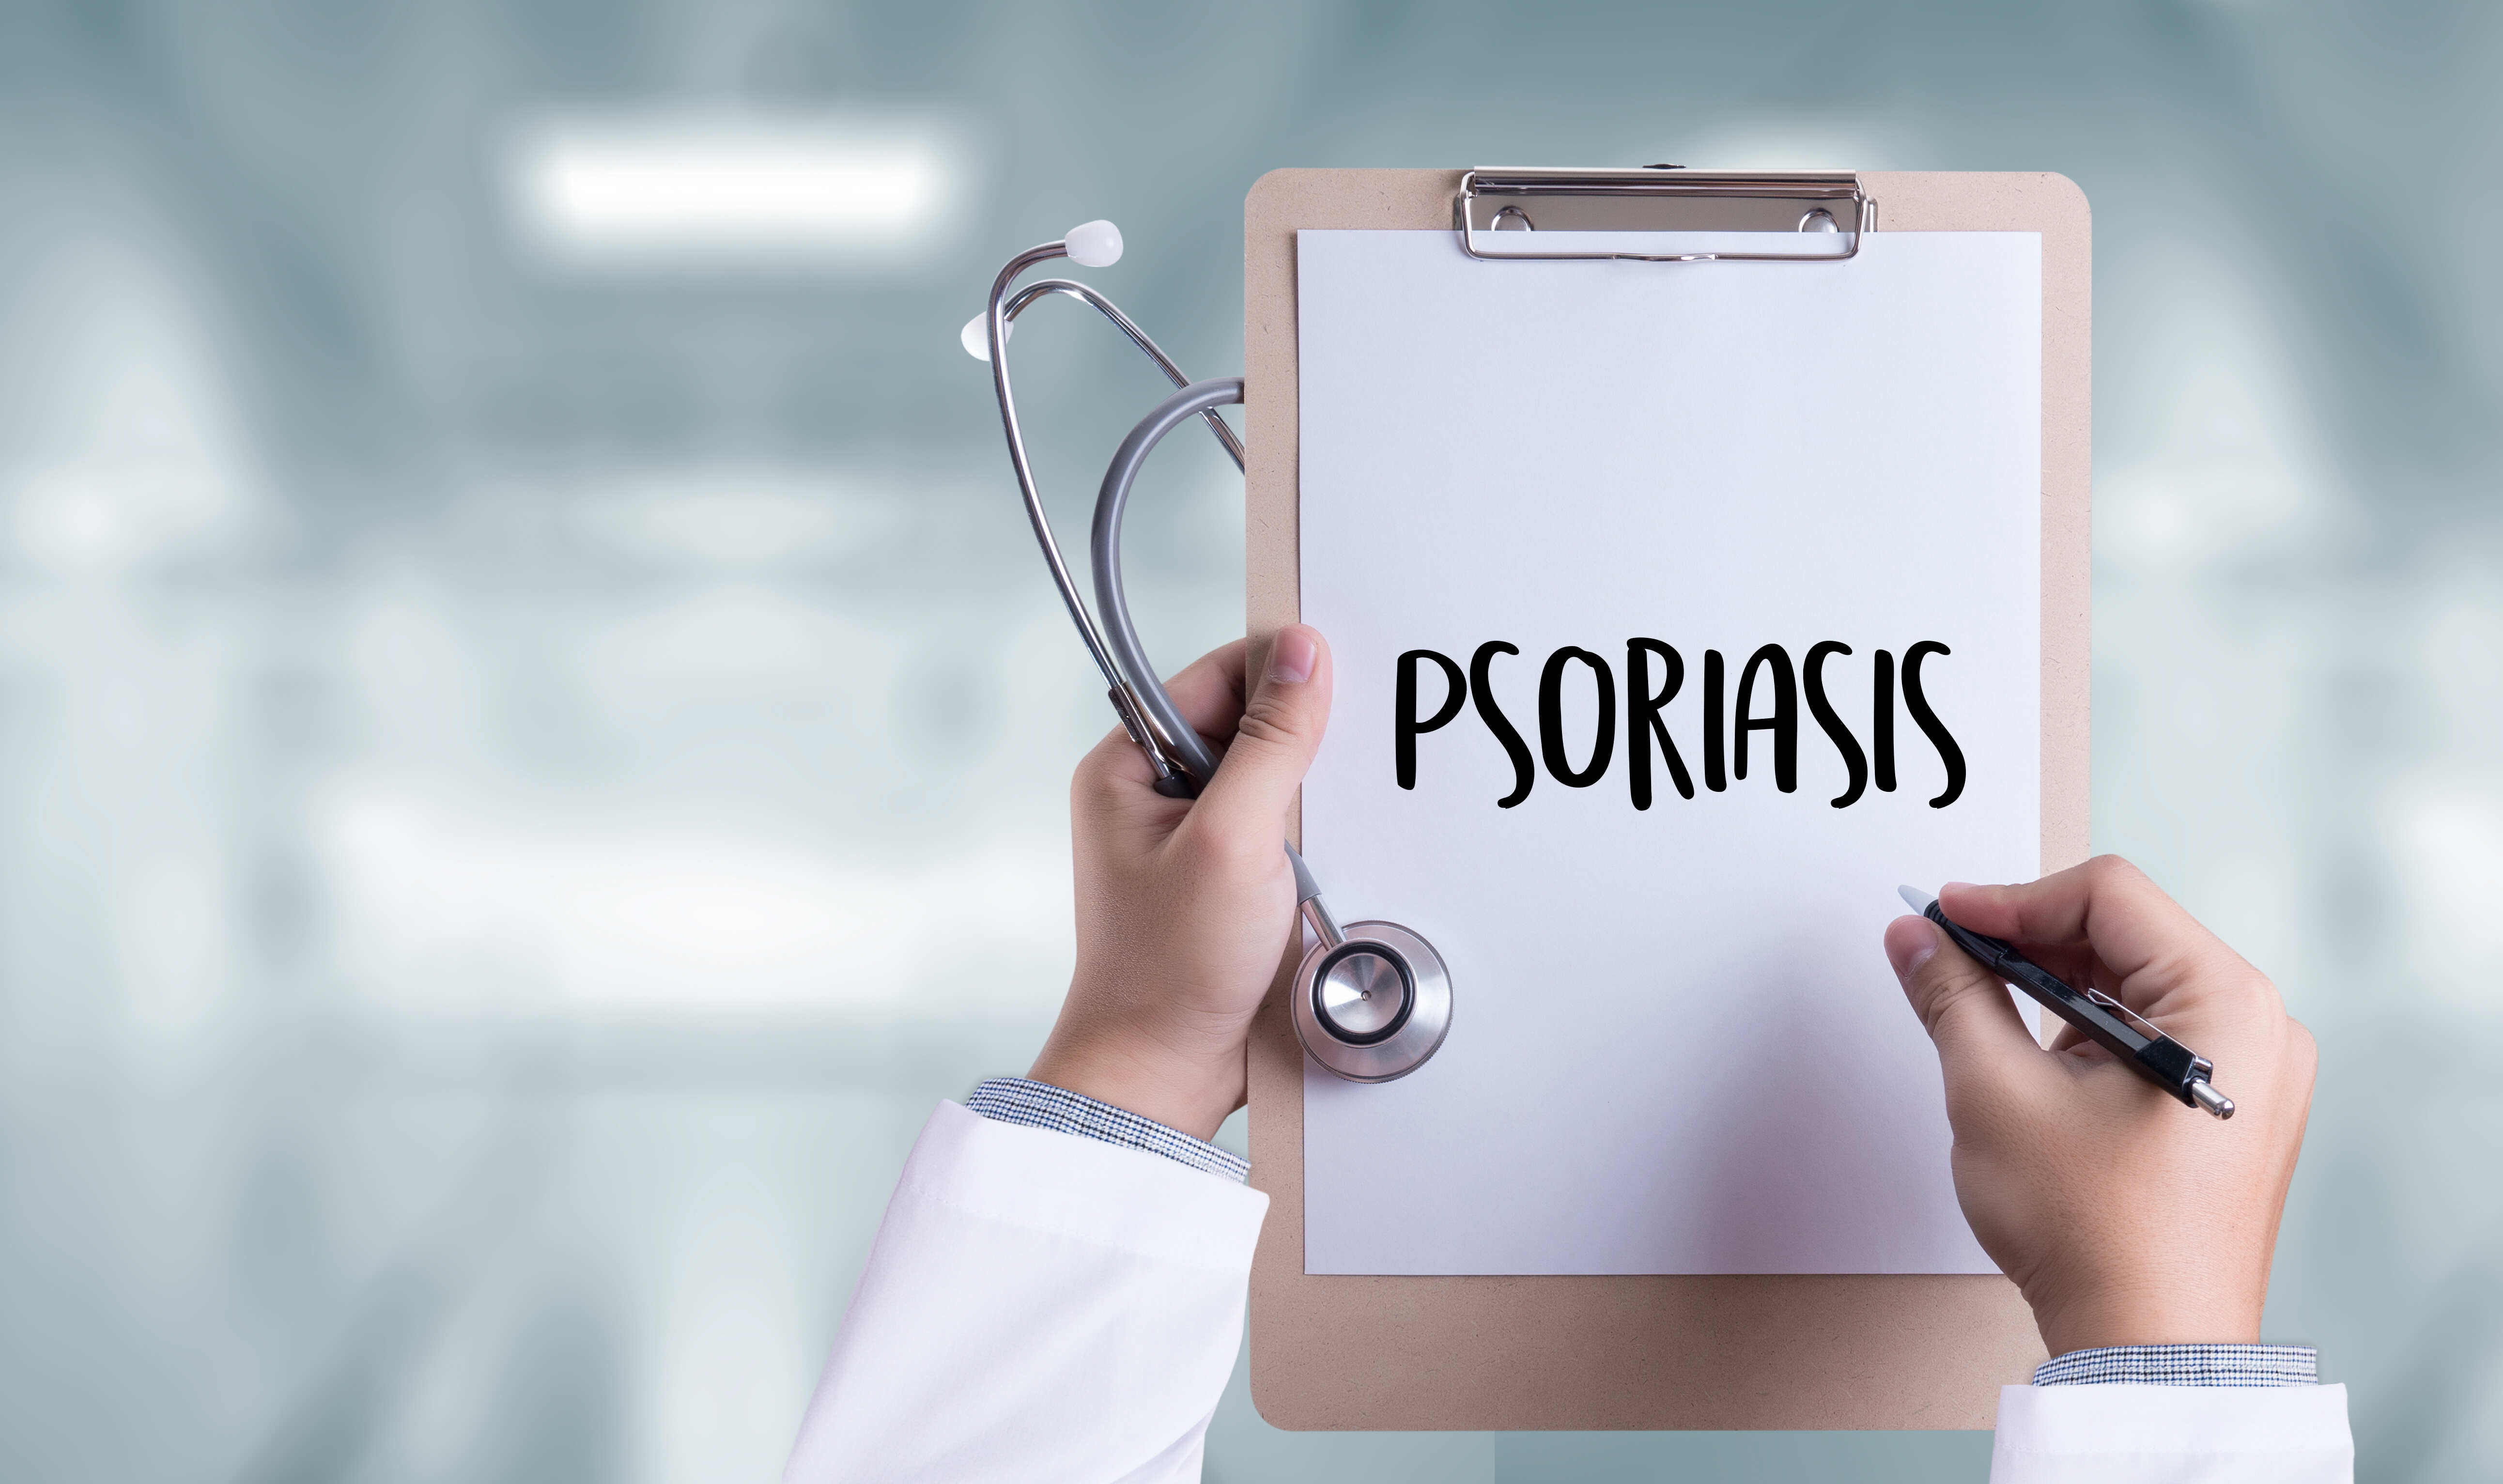 Doctor writing suggestions to prevent against psoriasis